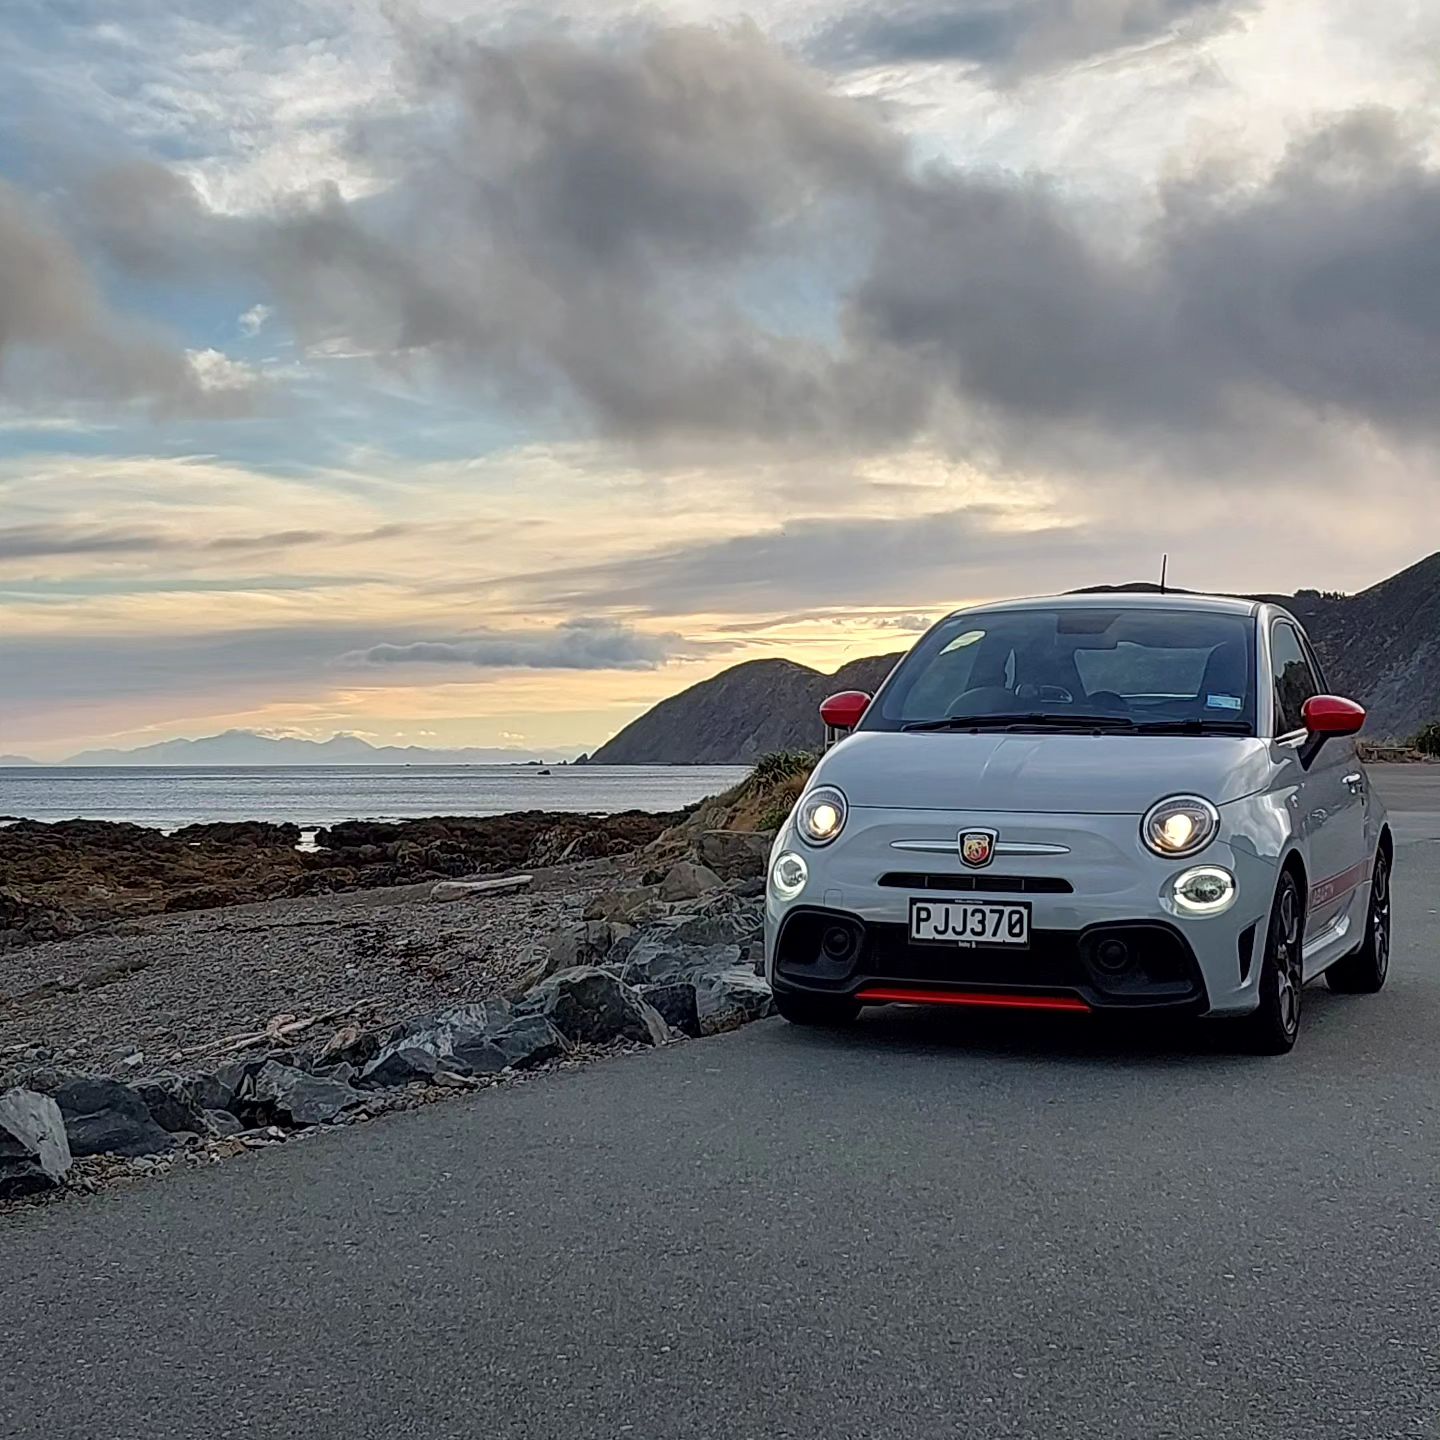 Notice me Senpai ☺️ 
Joke aside, Fiat and Abarth really did a fantastic job. Such a cute face!
.
Can't wait to make it even cuter! 🩷🩵
.
.
.
#cutecars #abarth #abarth595 #carphotography #cars #fiat